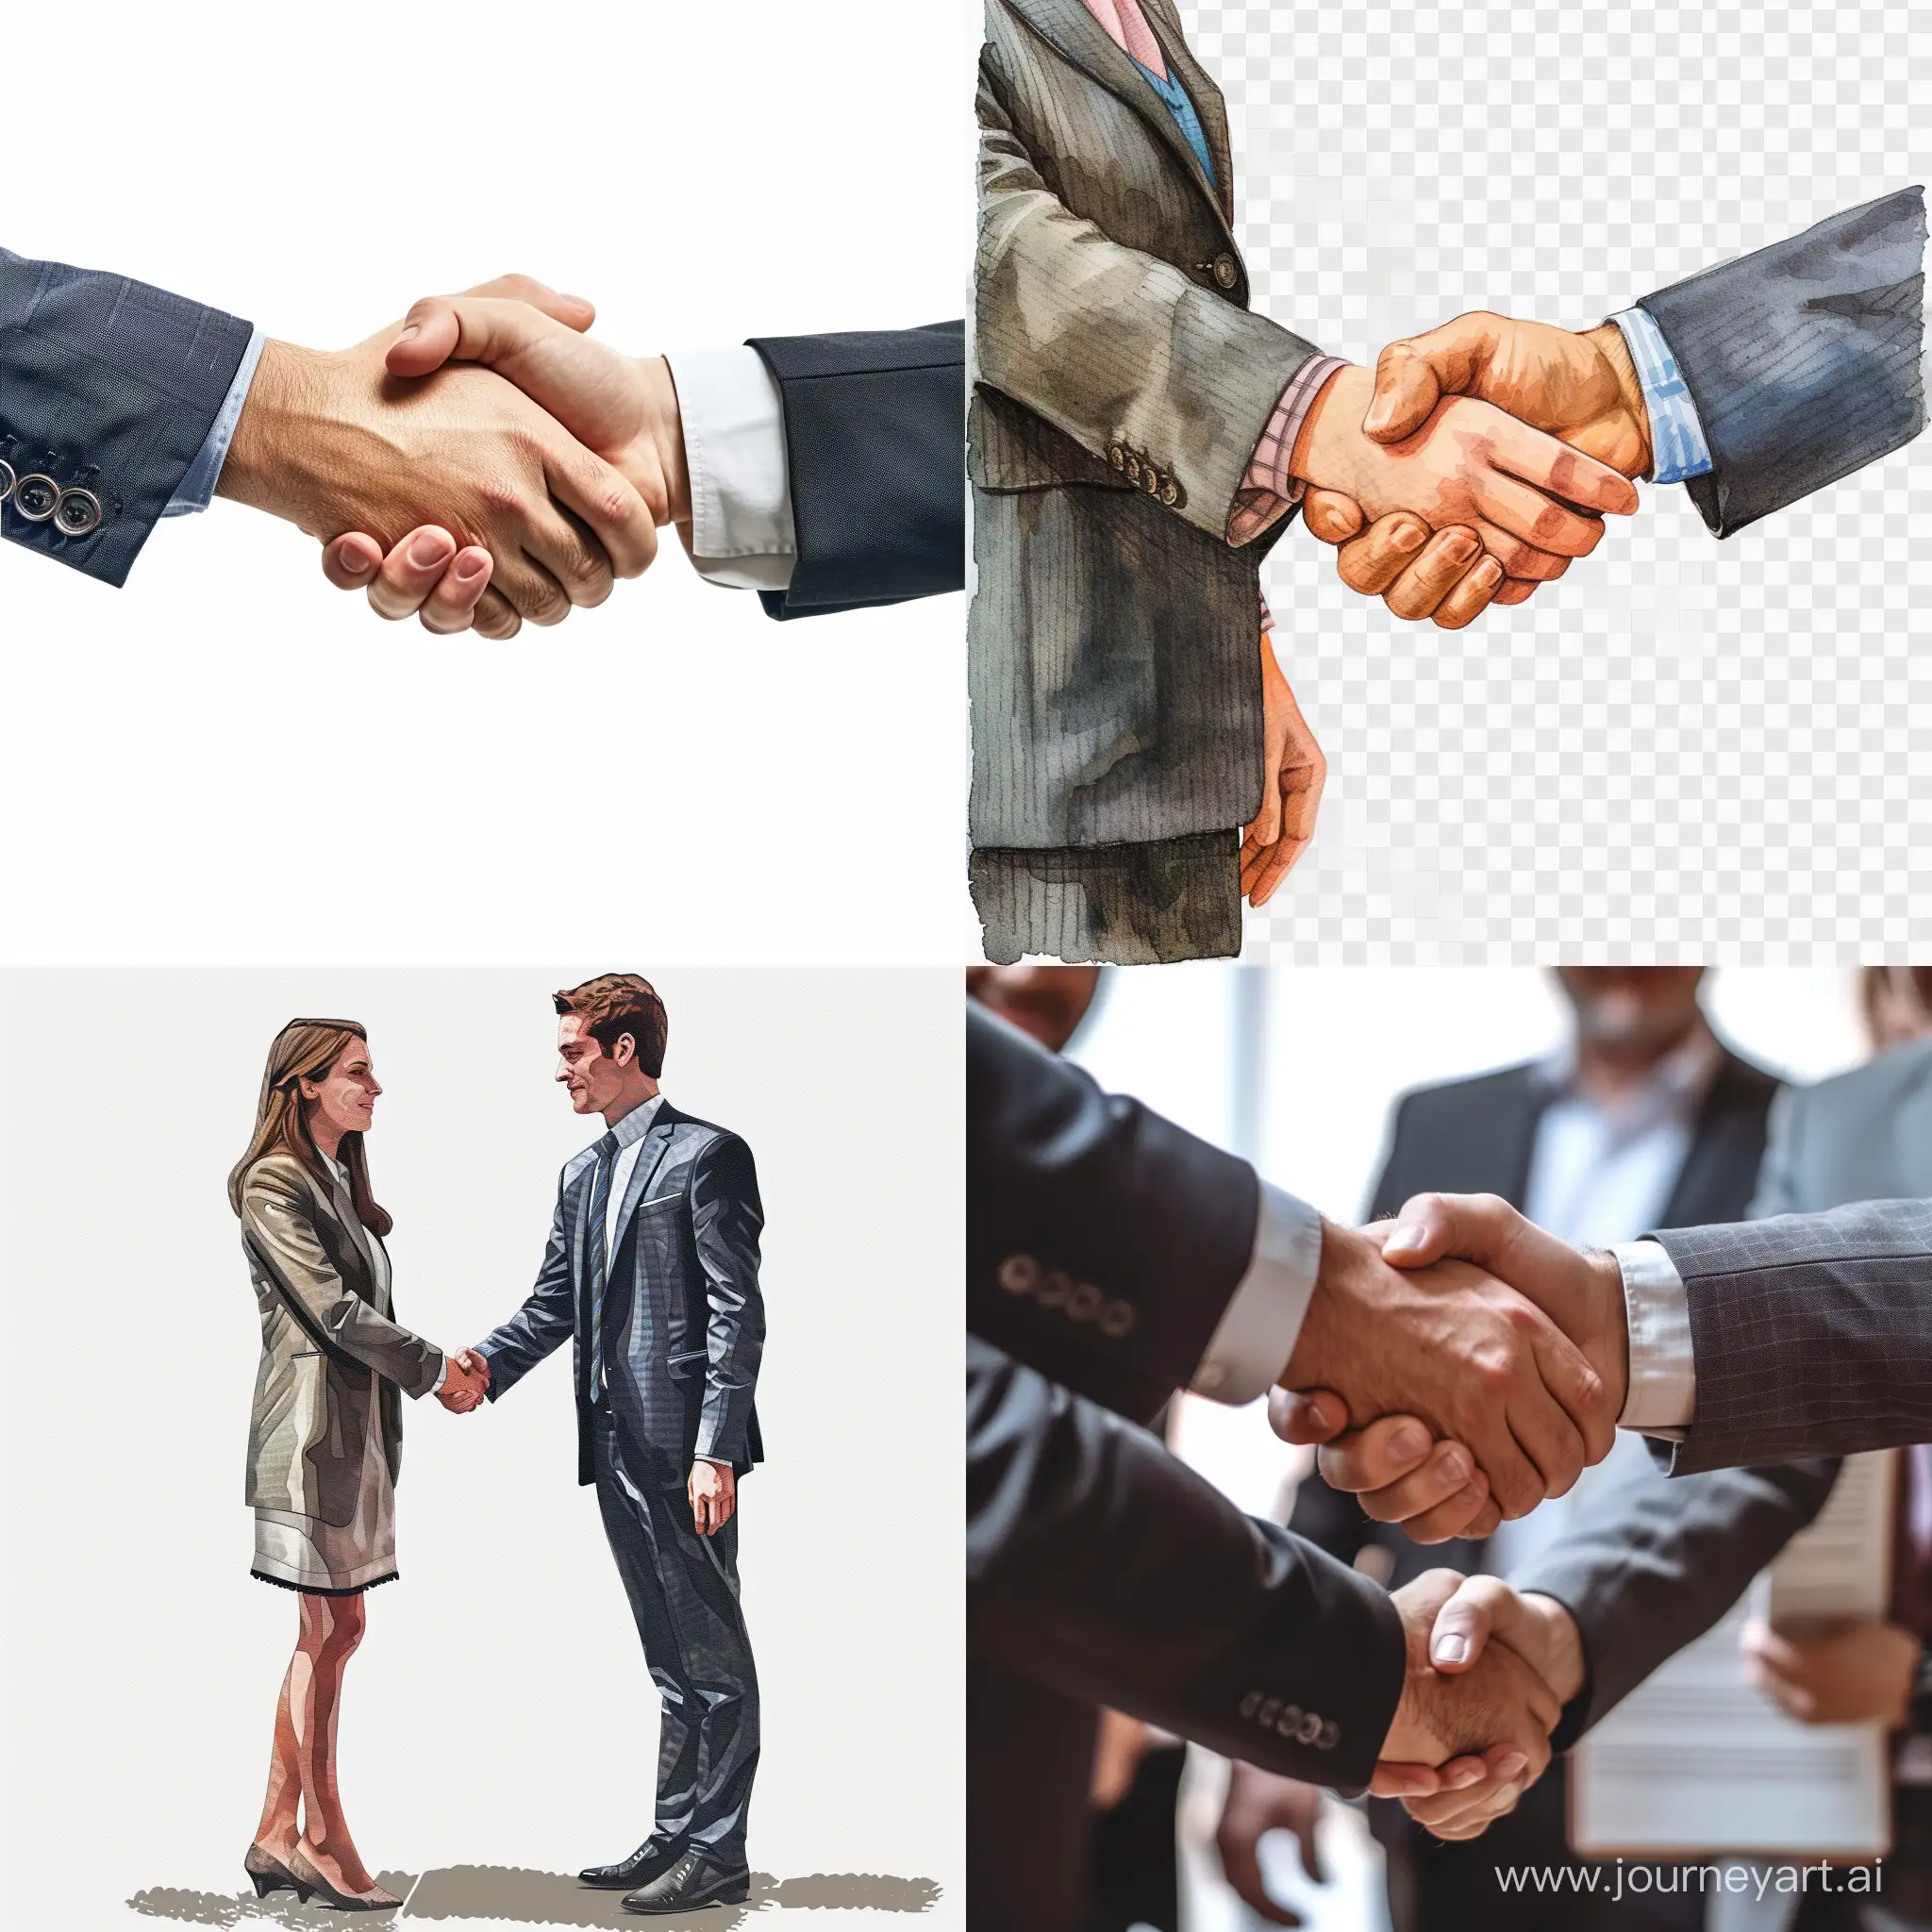 Professional-Handshake-of-Business-Executives-in-Hyperrealistic-Style